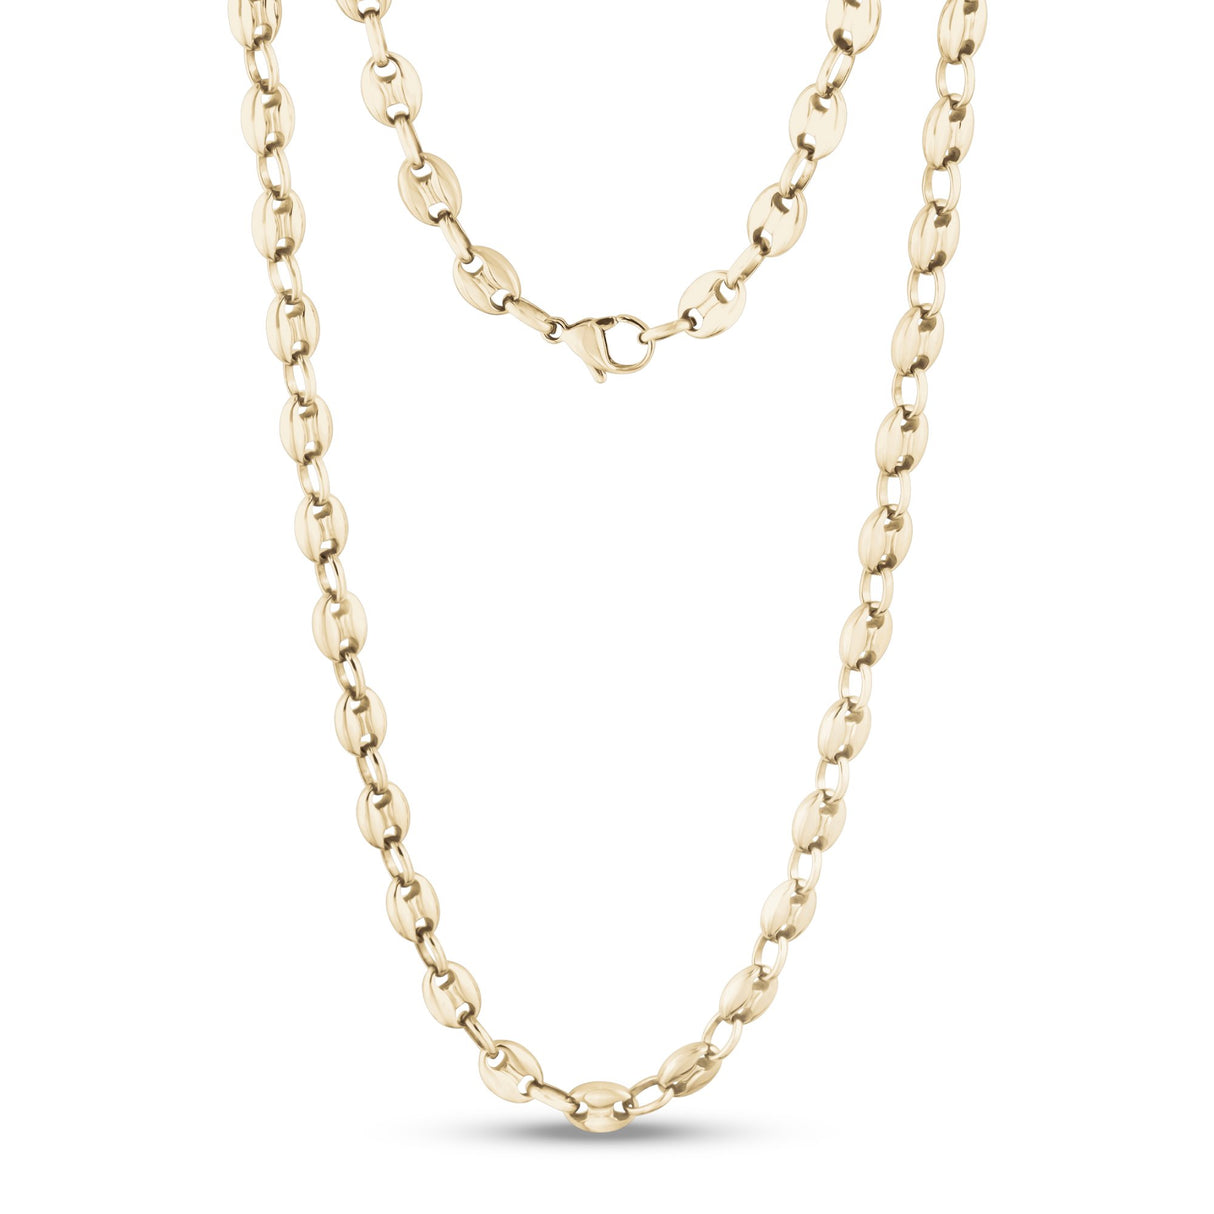 Women's Necklaces - 6mm Gold Coffee Bean Link Chain